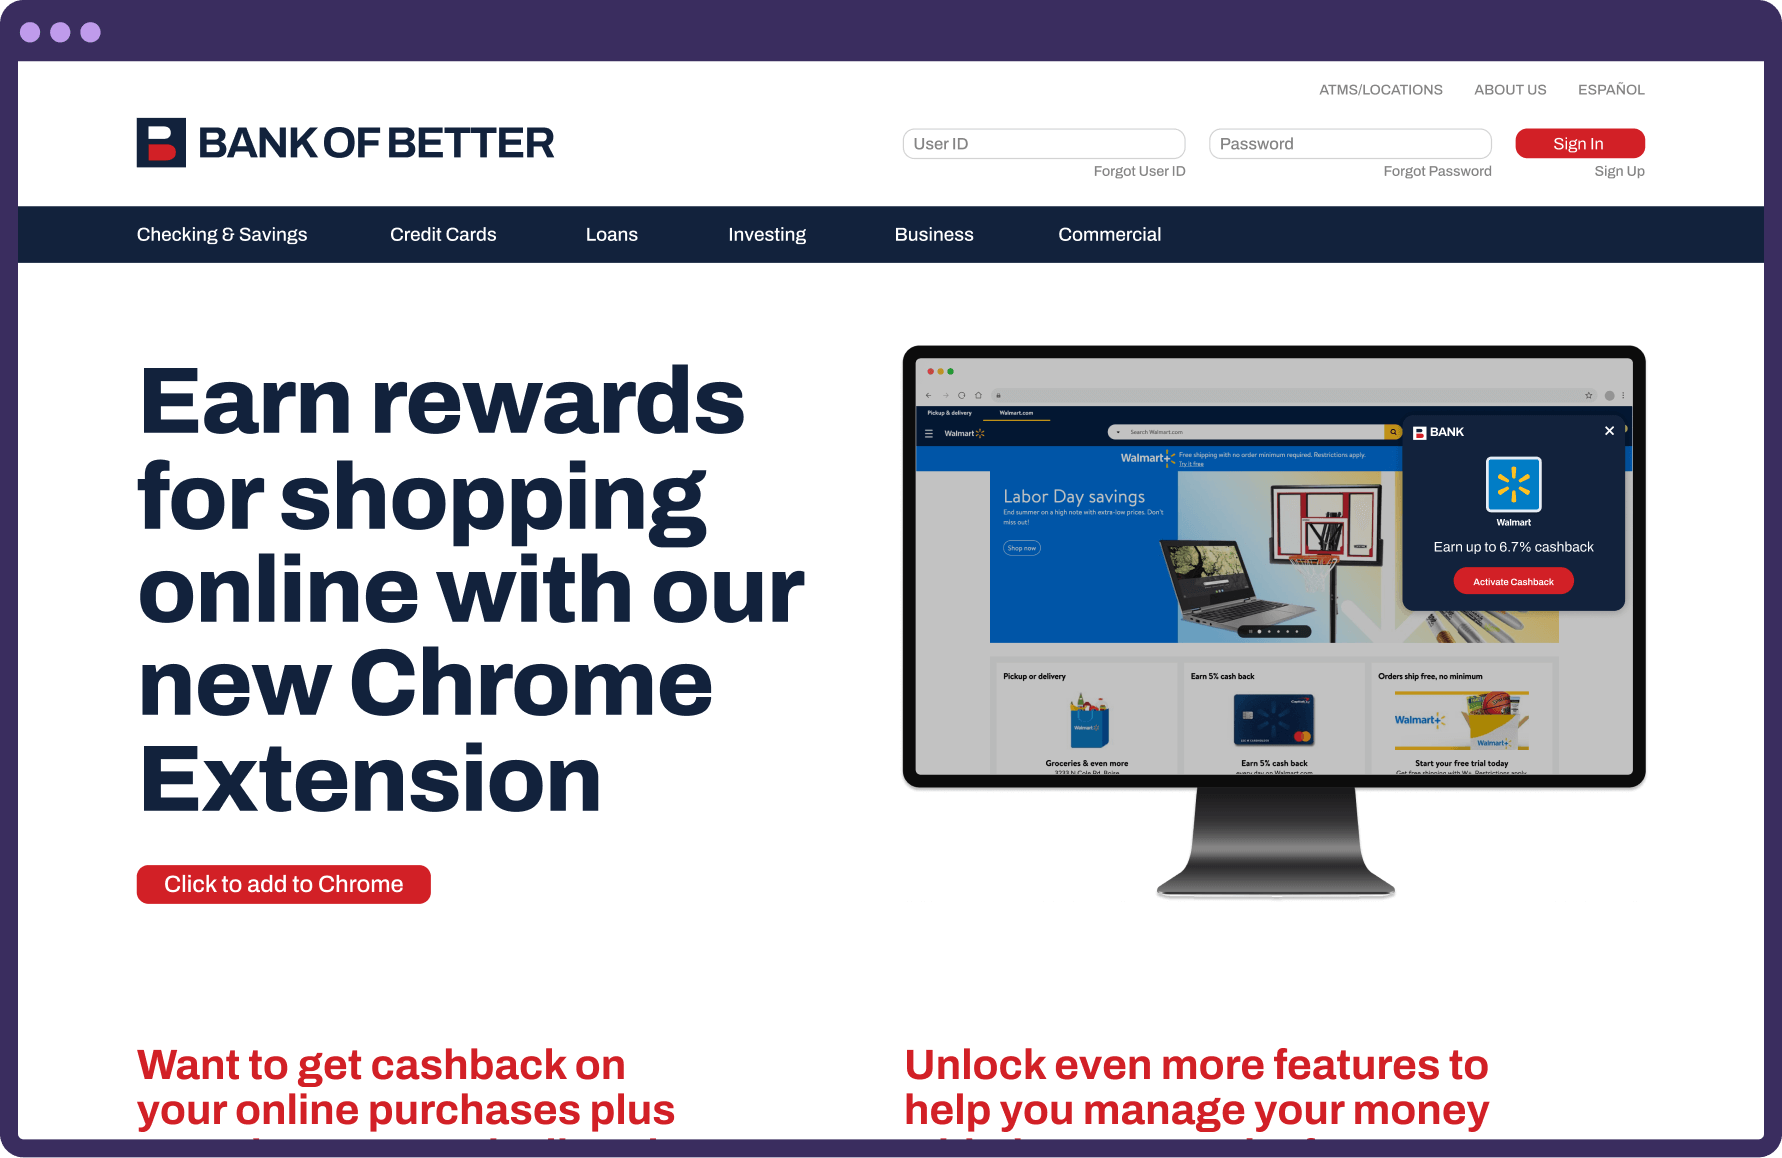 Generic Bank of Better Rewards Landing Page that says earn rewards for shopping online without new chrome extension in Dark Purple Browser Frame